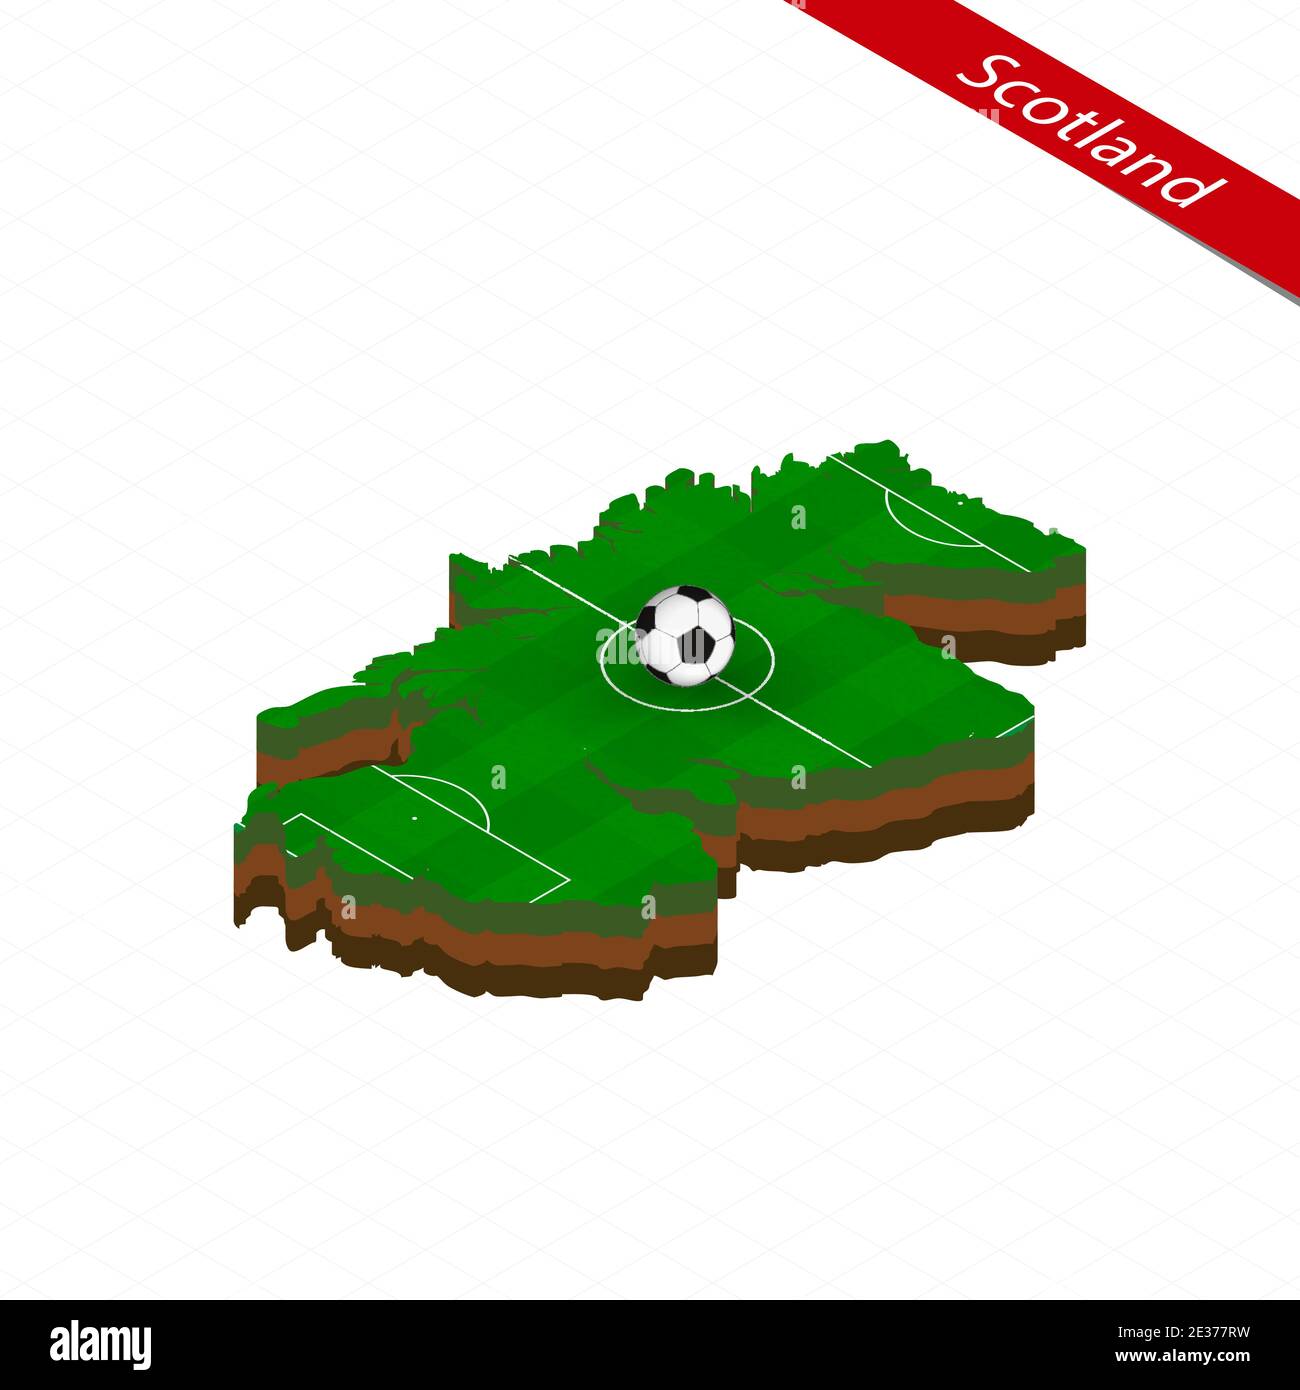 Isometric map of Scotland with soccer field. Football ball in center of ...